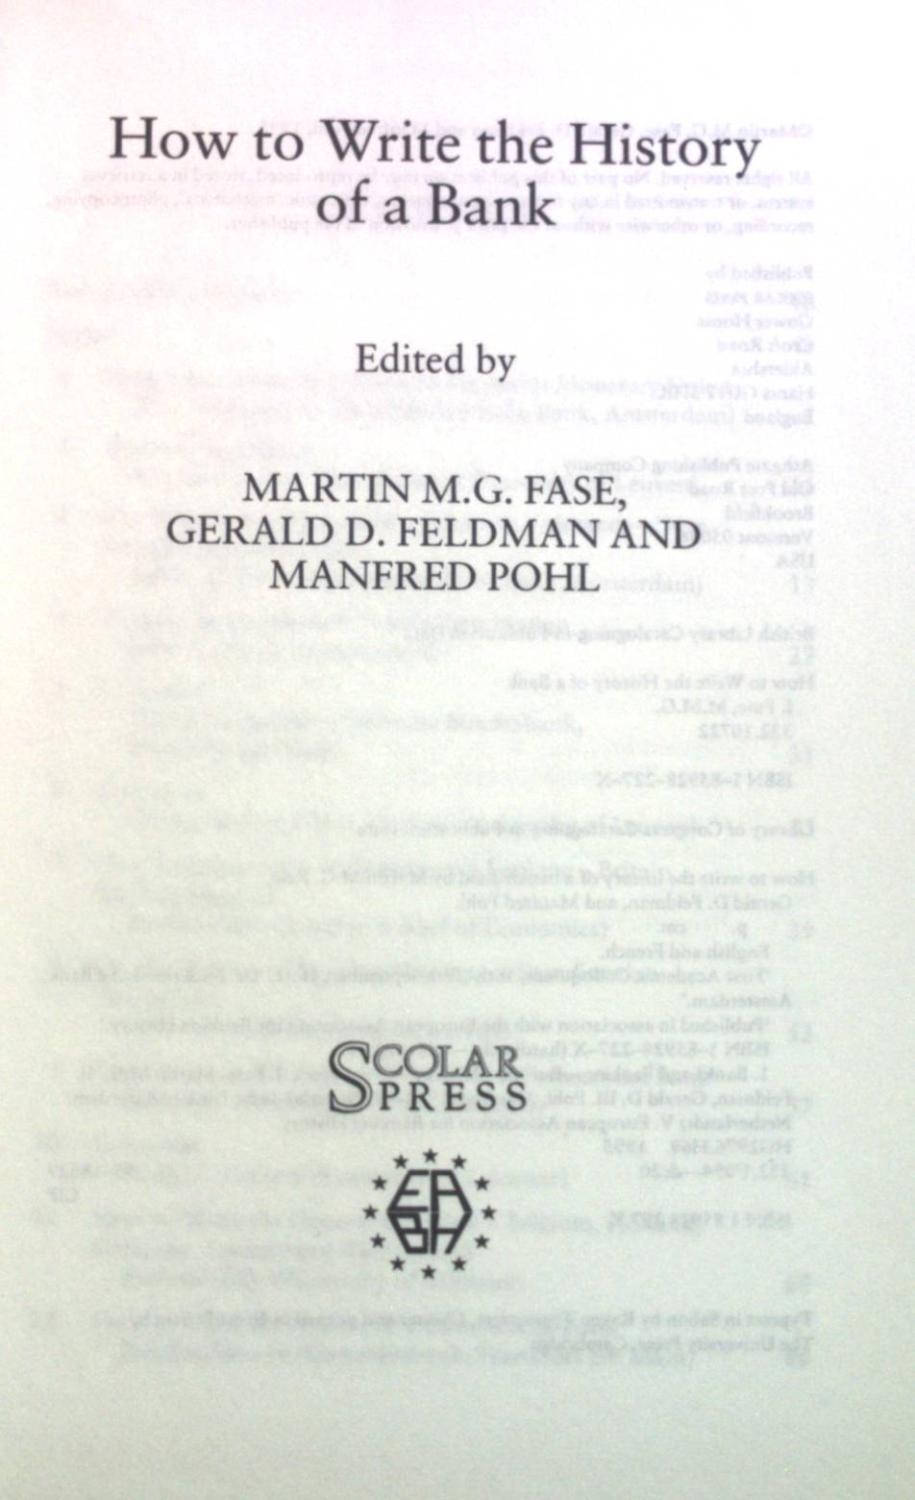 How to Write the History of a Bank. Studies in Banking History - Fase, Martin M. G., Gerald D. Feldman and Manfred Pohl